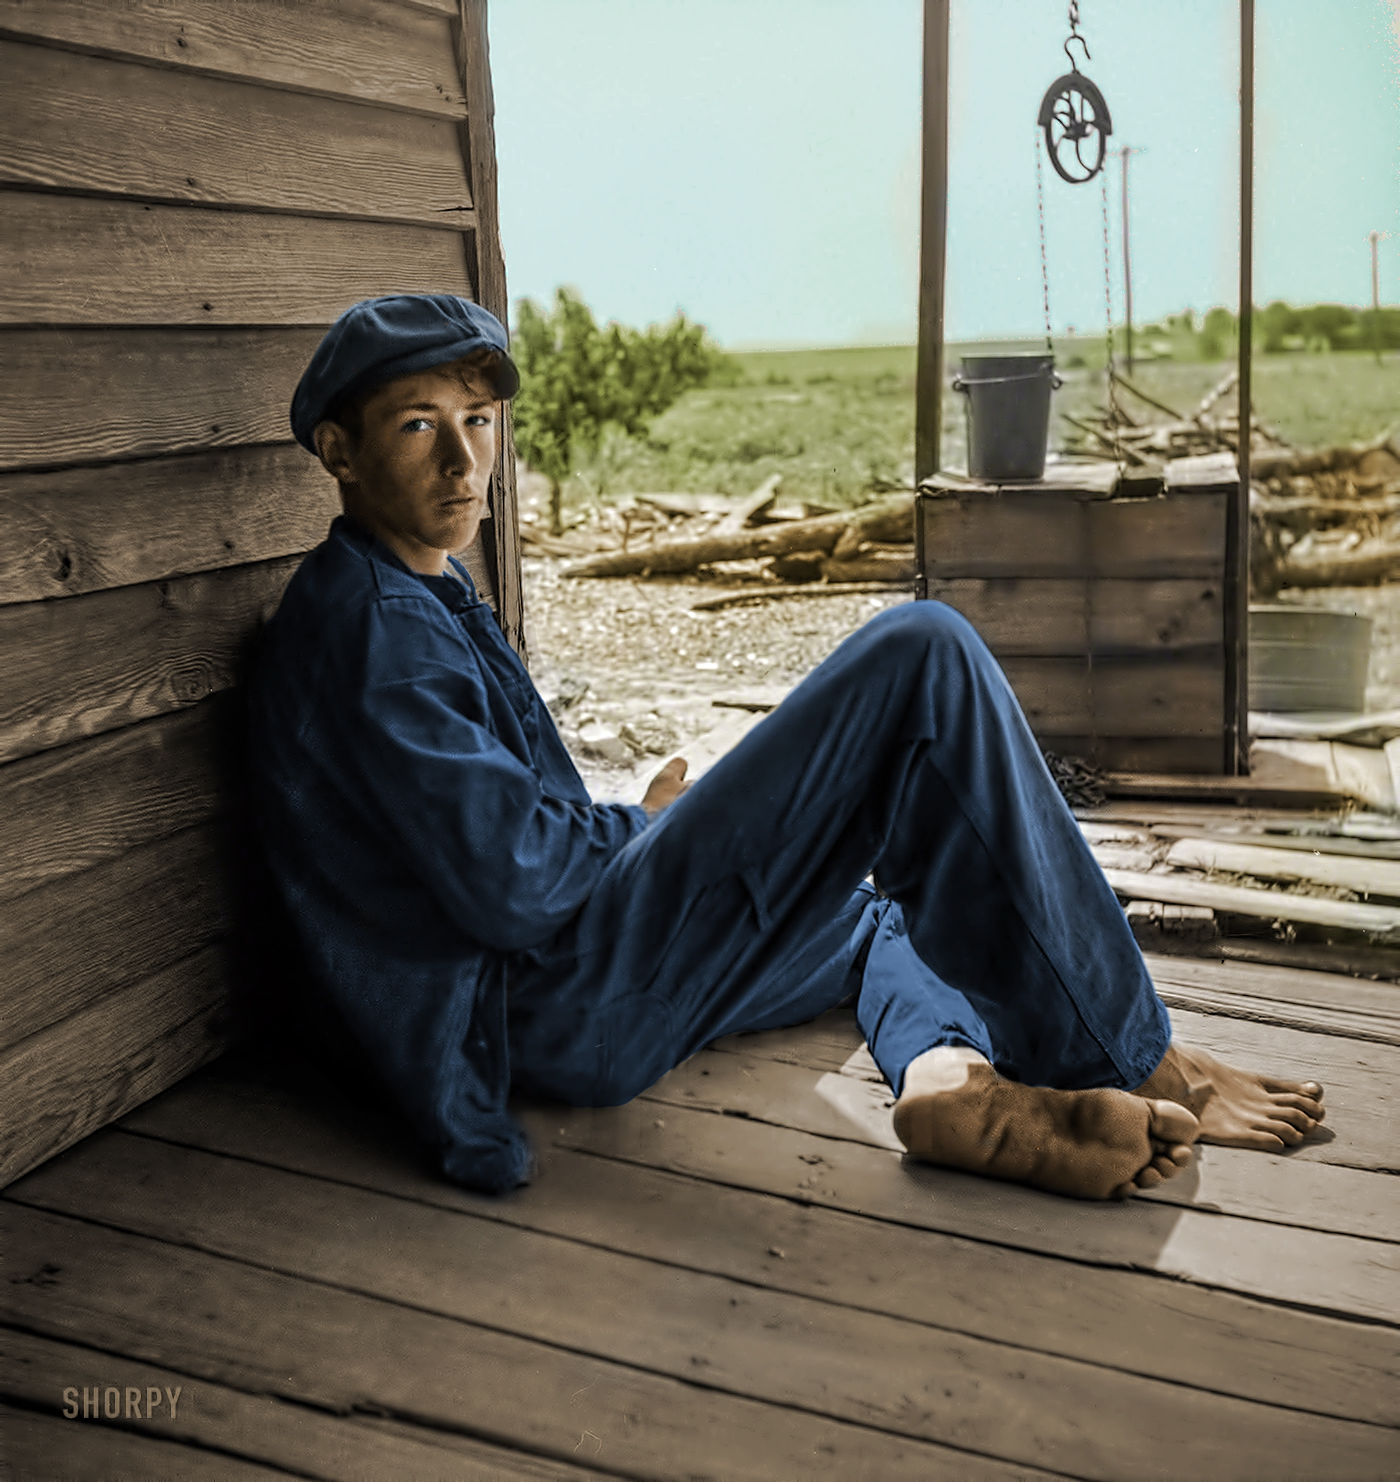 Colorized from this Shorpy original. A beautiful picture - I only colorized it. View full size.